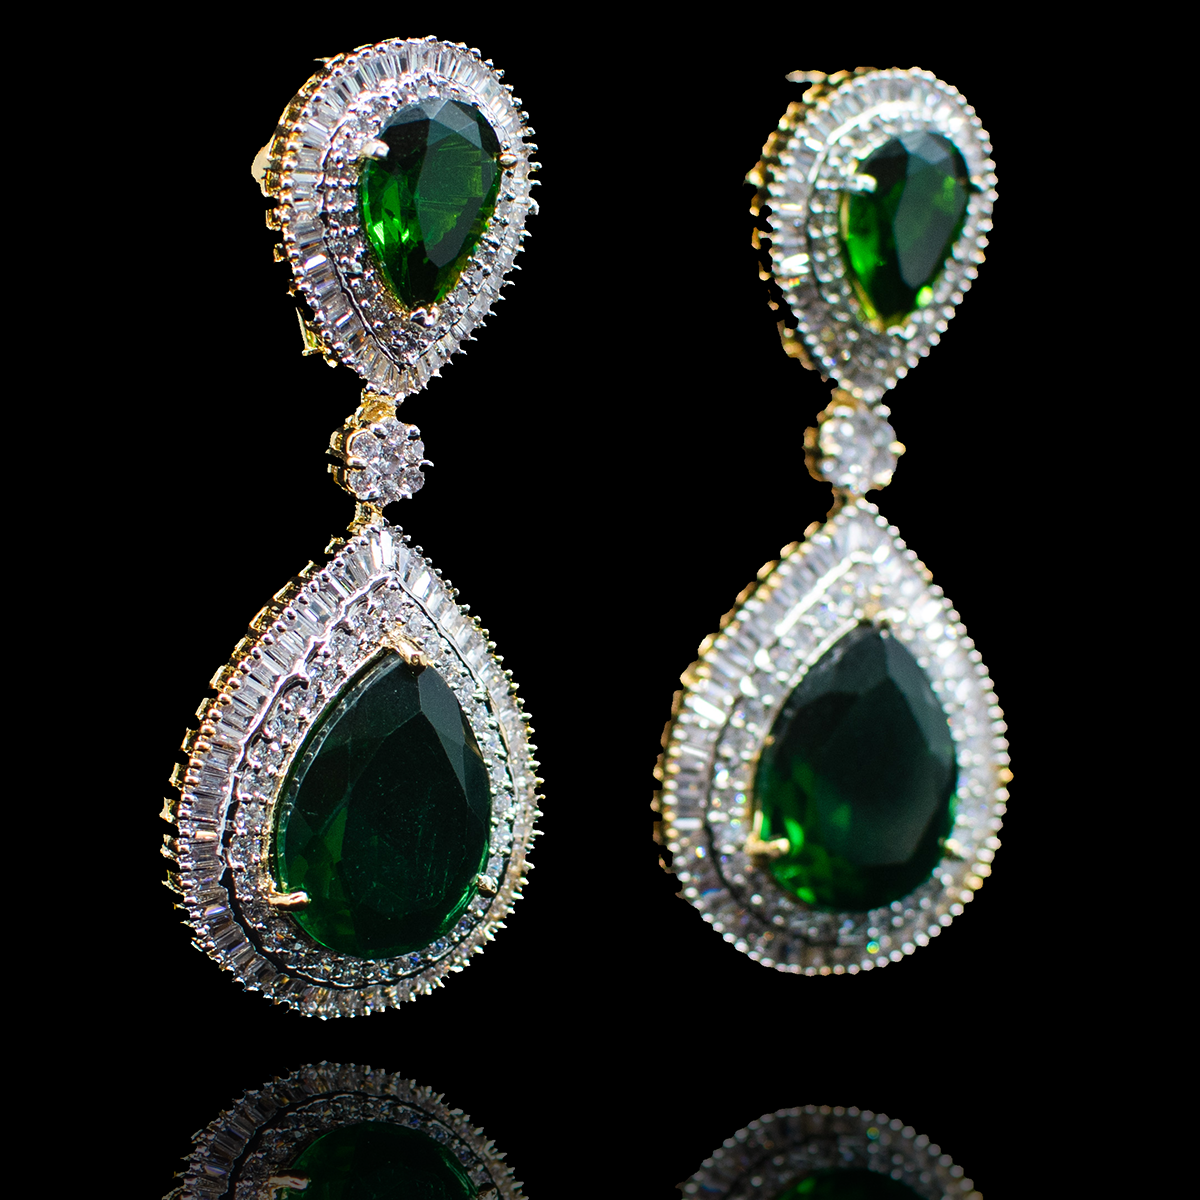 Anita Earrings - Available in 2 Colors